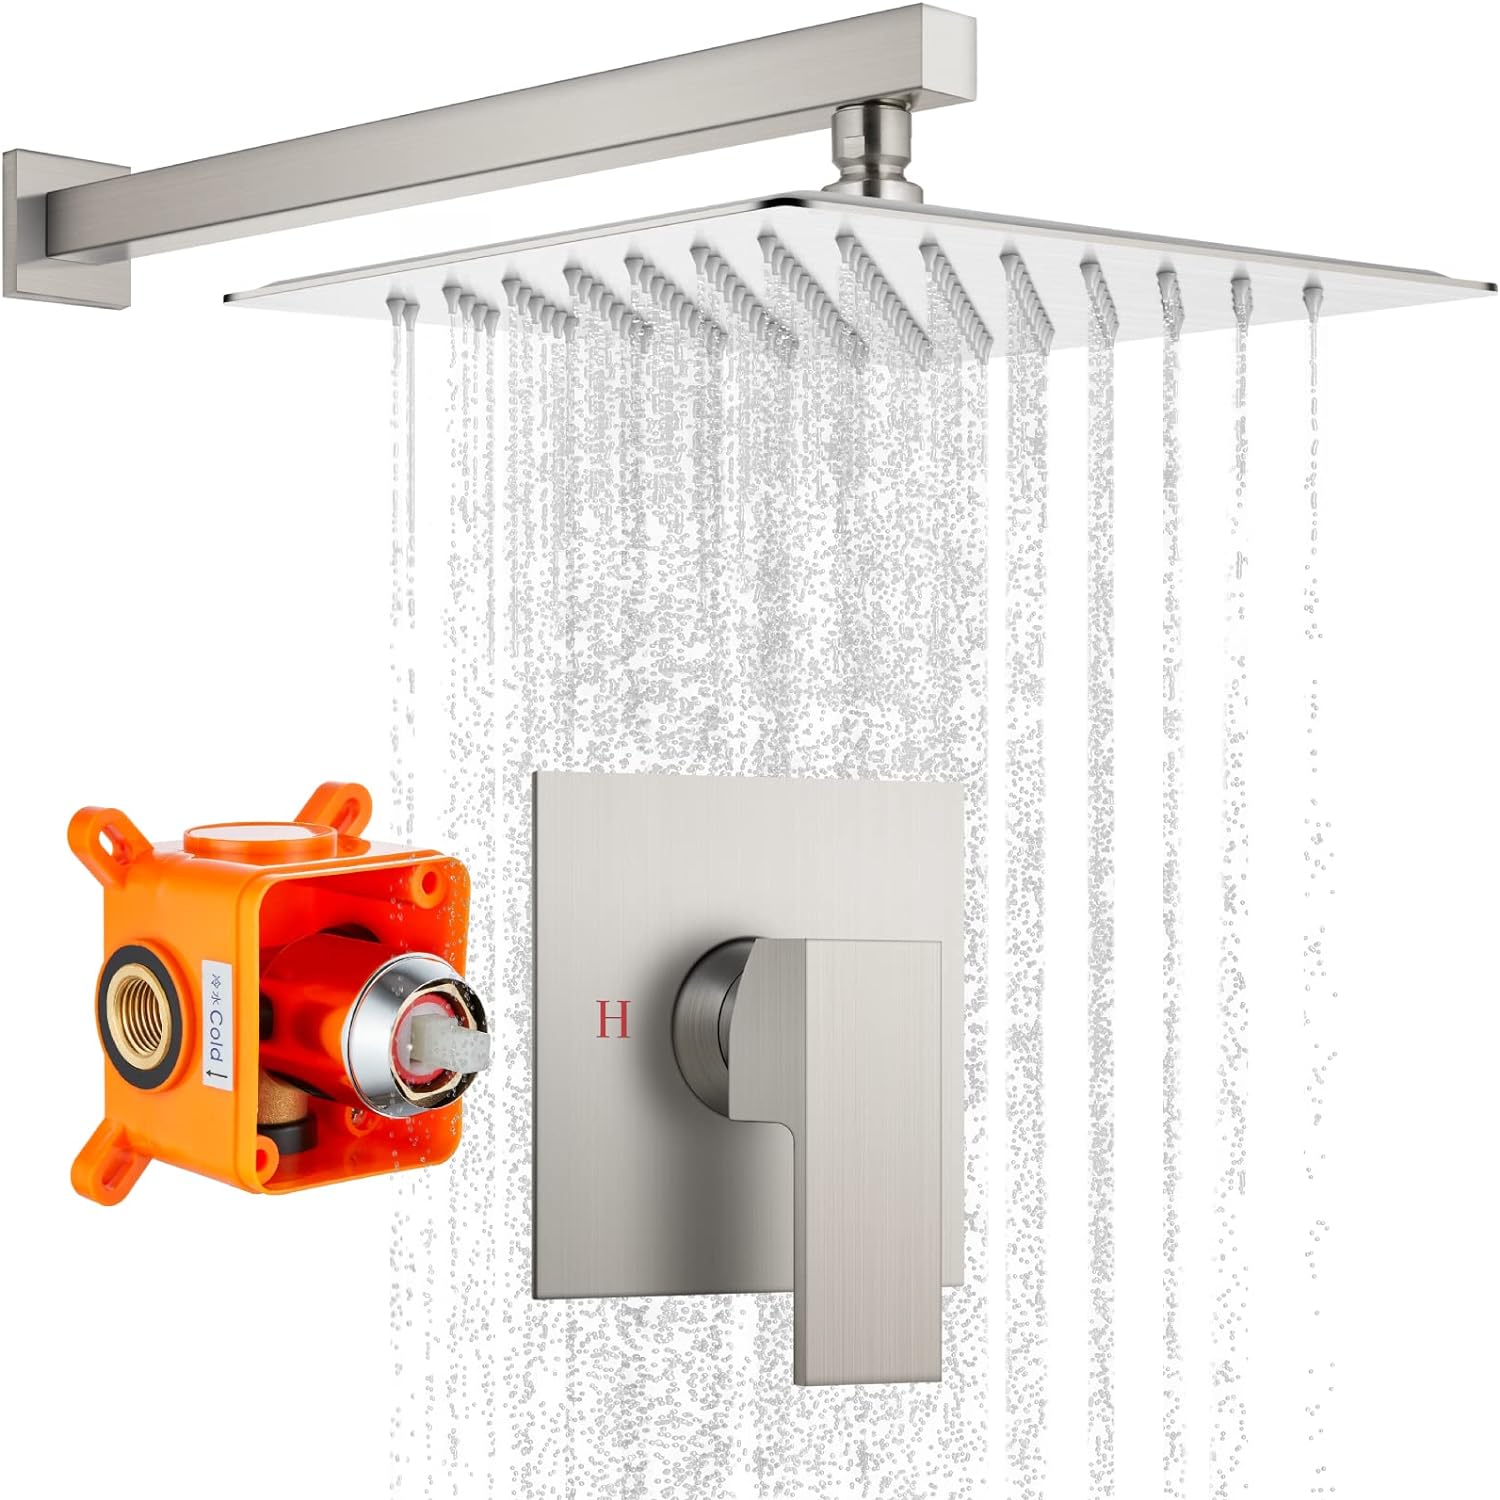 gotonovo 10" Rain Shower System Brushed Nickel Luxury High Pressure Shower Head Bathroom Shower Faucet Set Rough-in Valve and Shower Trim Included